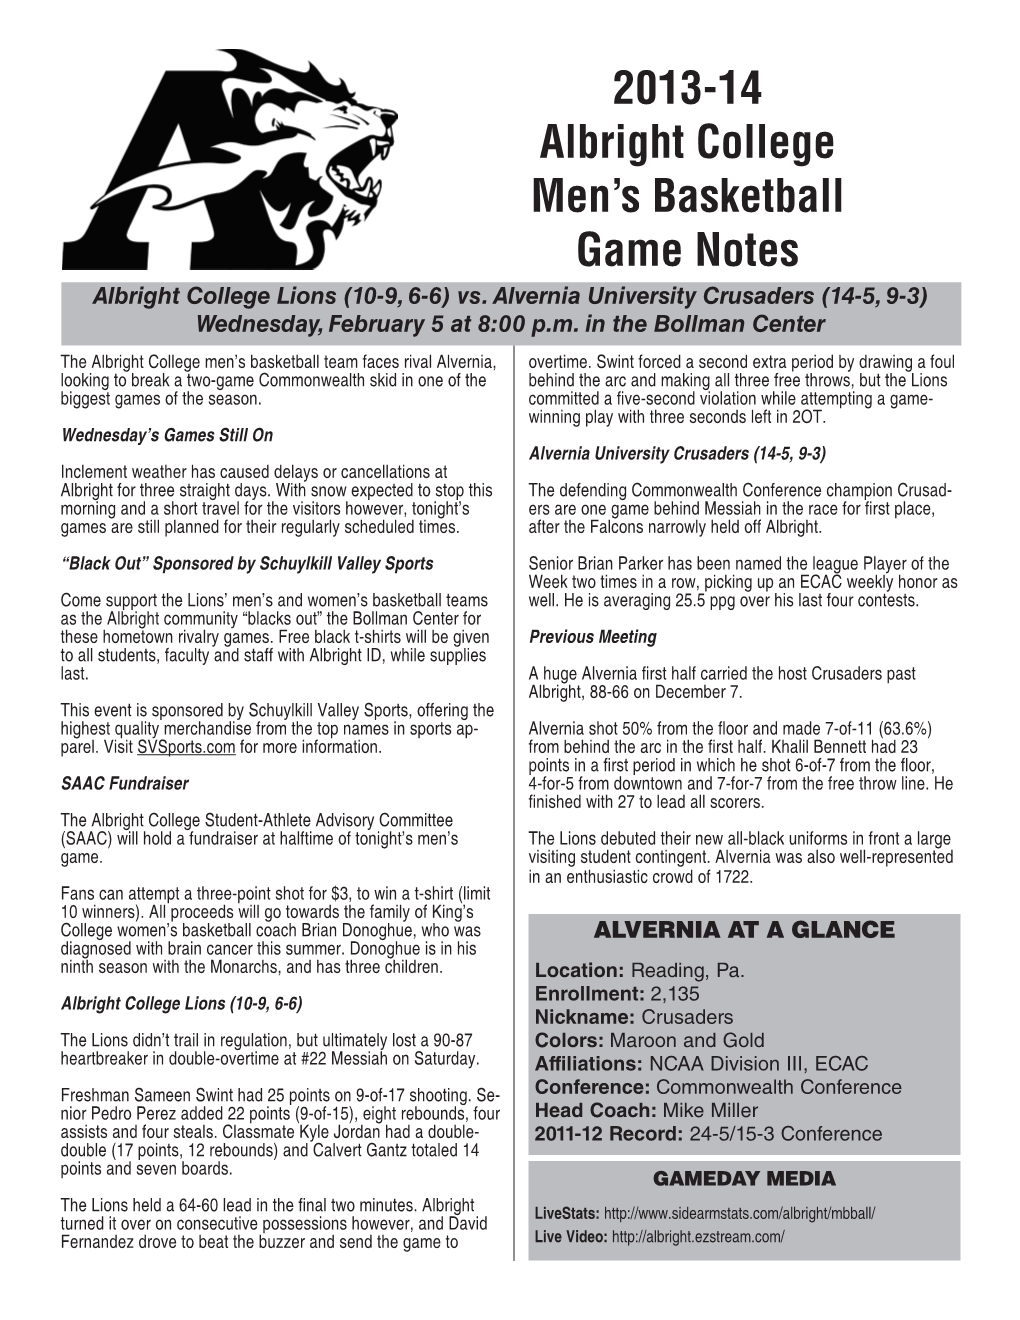 2013-14 Albright College Men's Basketball Game Notes